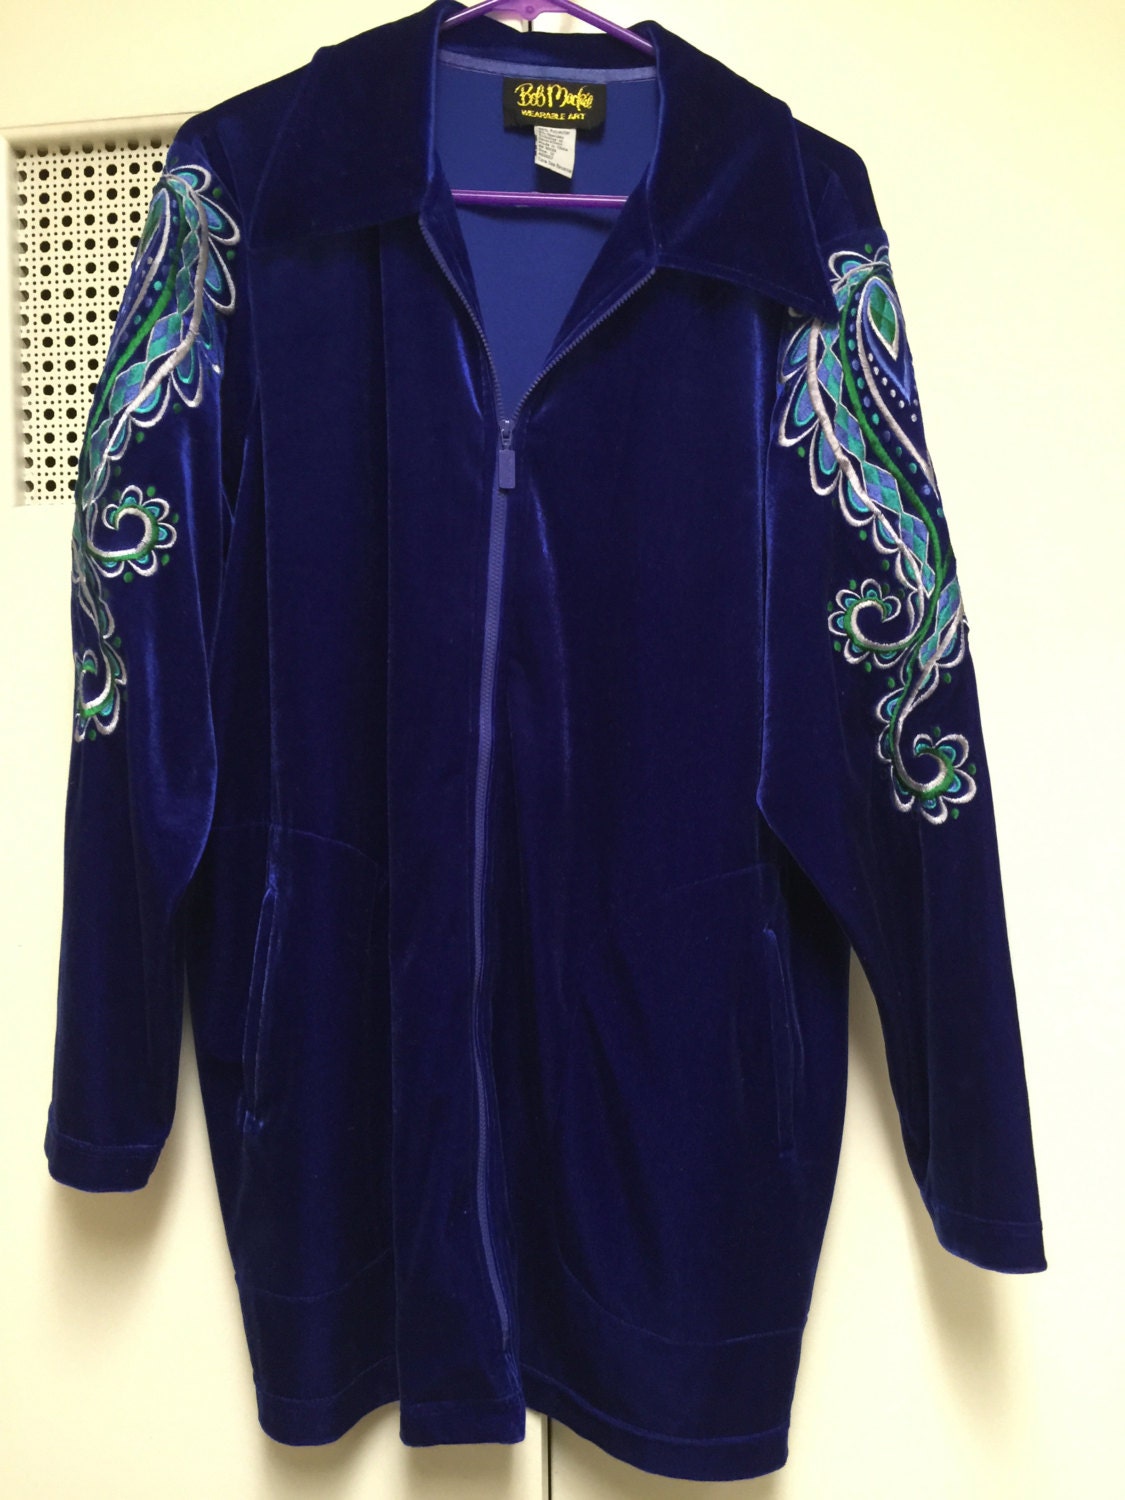 Bob Mackie wearable art/embroidered jacket/1X/blue by hoarderhaven